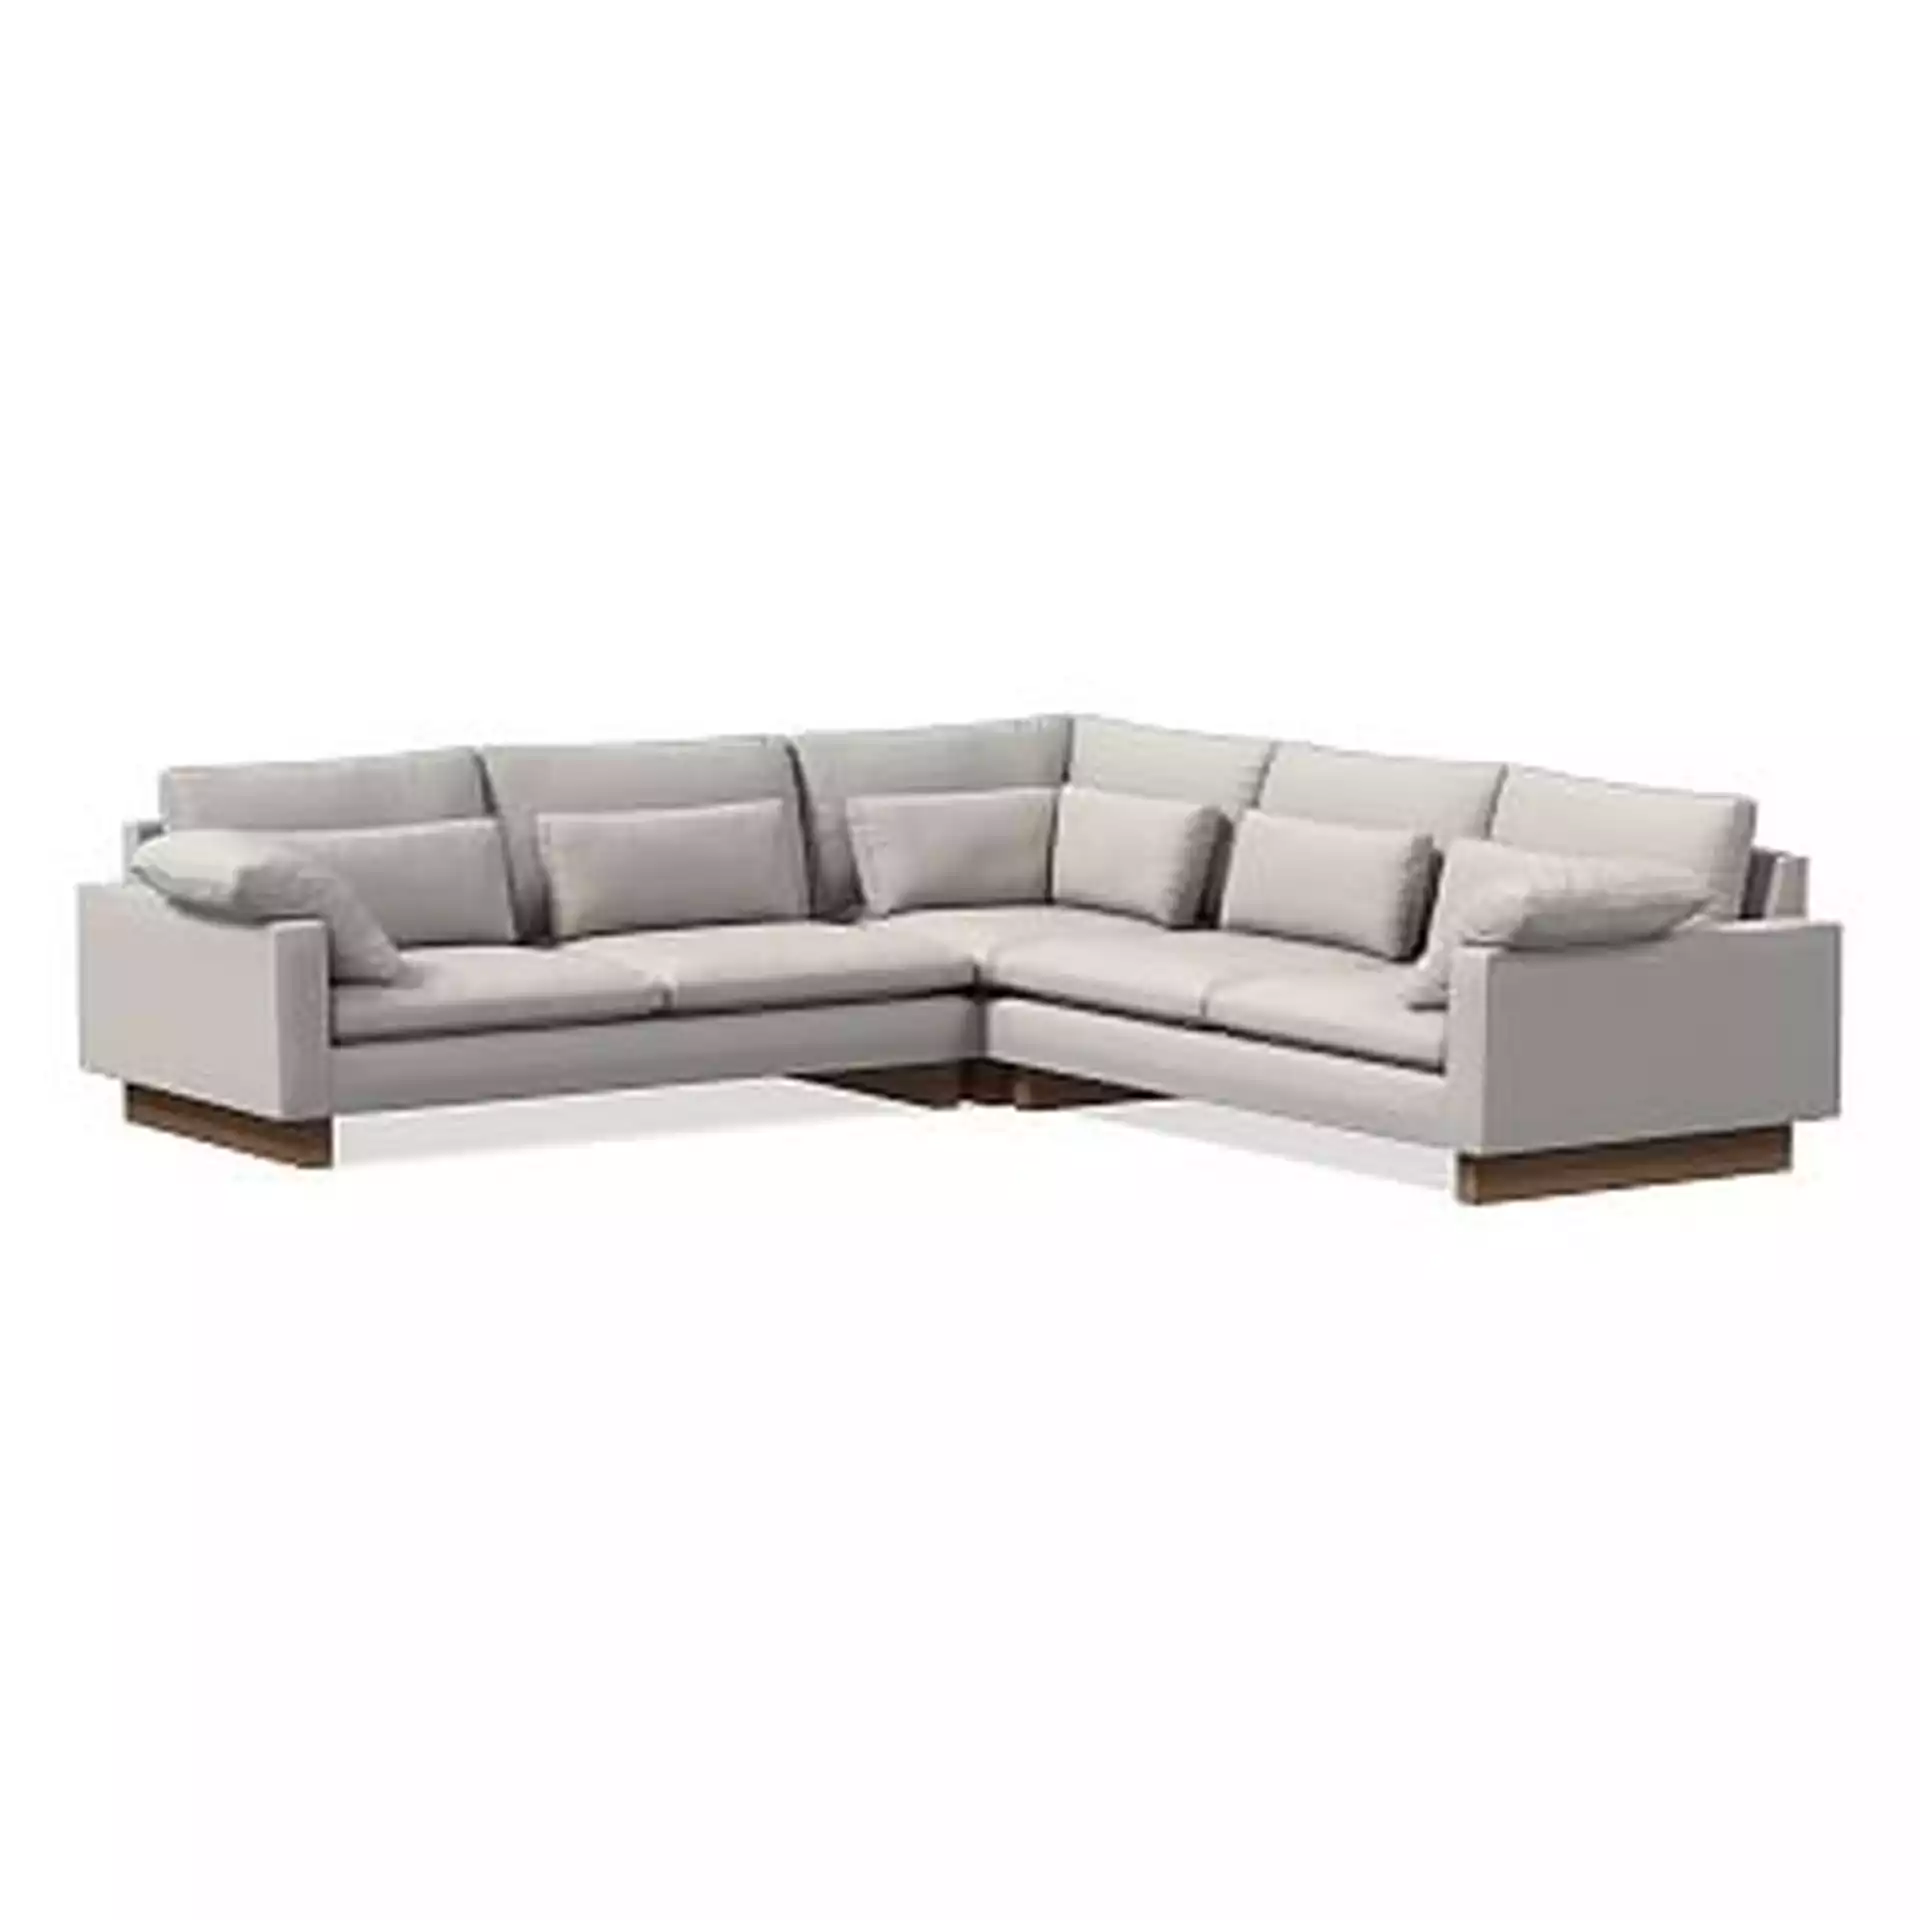 Harmony 2.5-Seat 3-Piece Corner Sectional, Down Blend, Performance Yarn Dyed Linen Weave, Frost Gray, Walnut